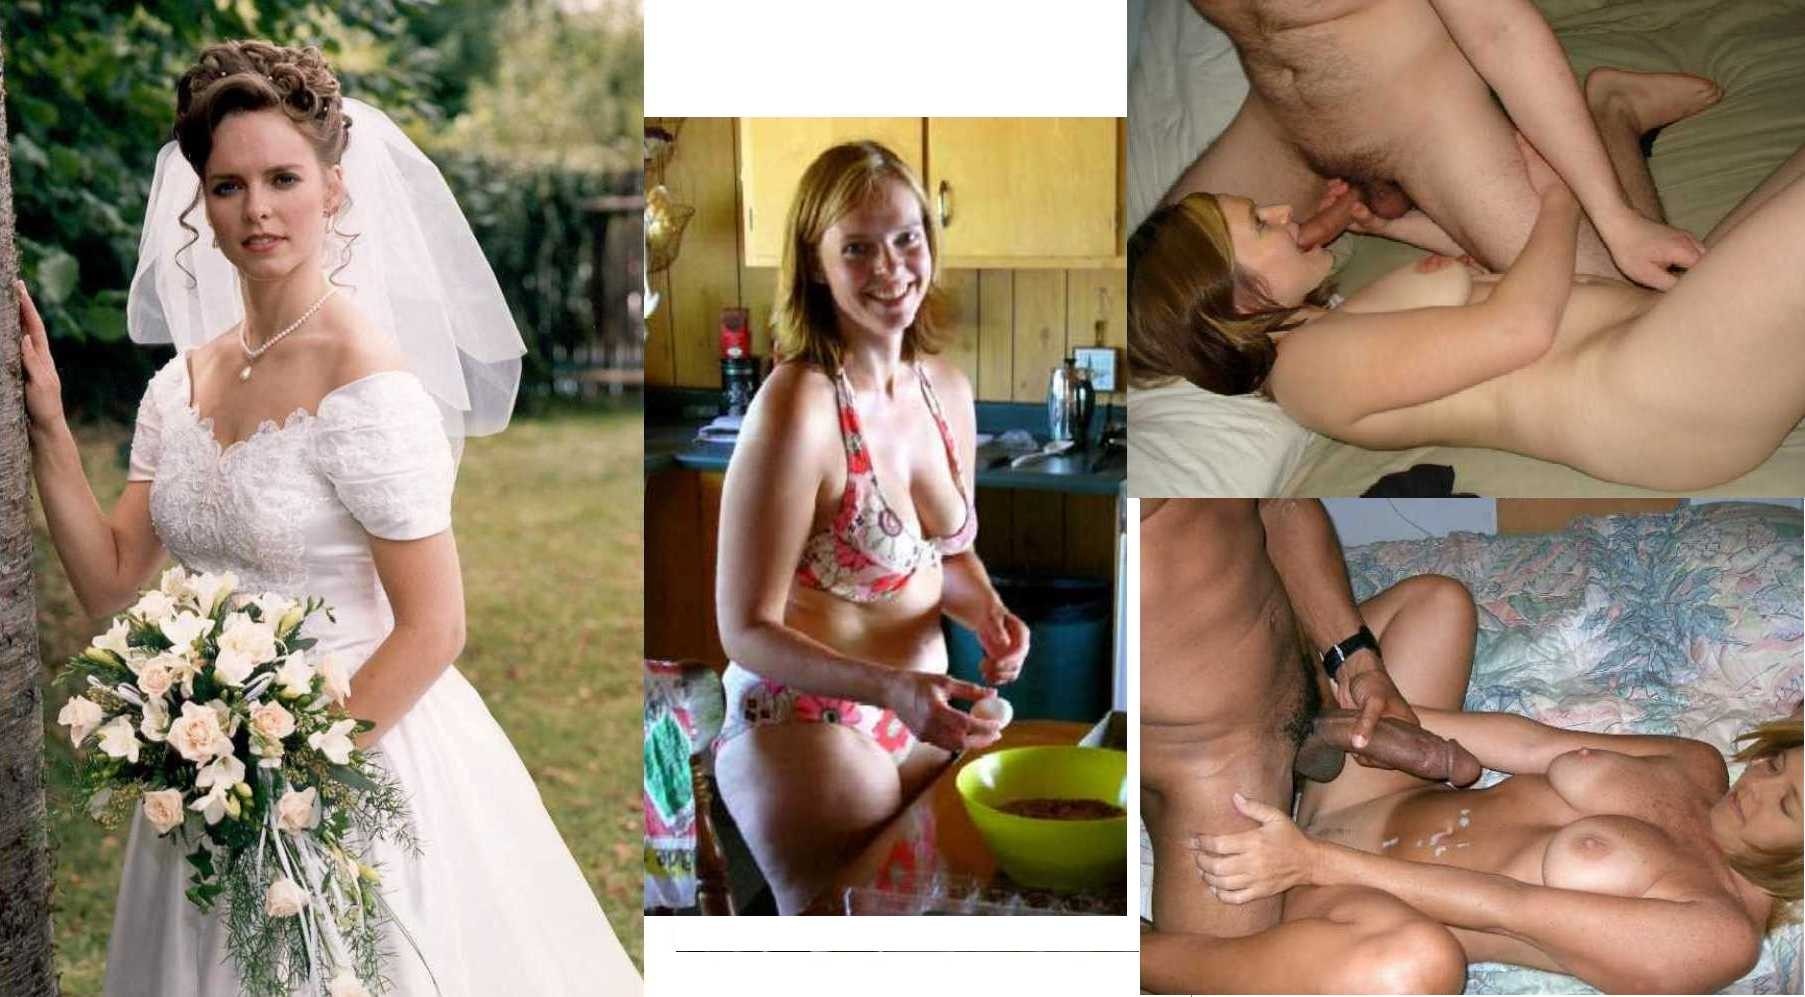 pics of wifes naked wedding